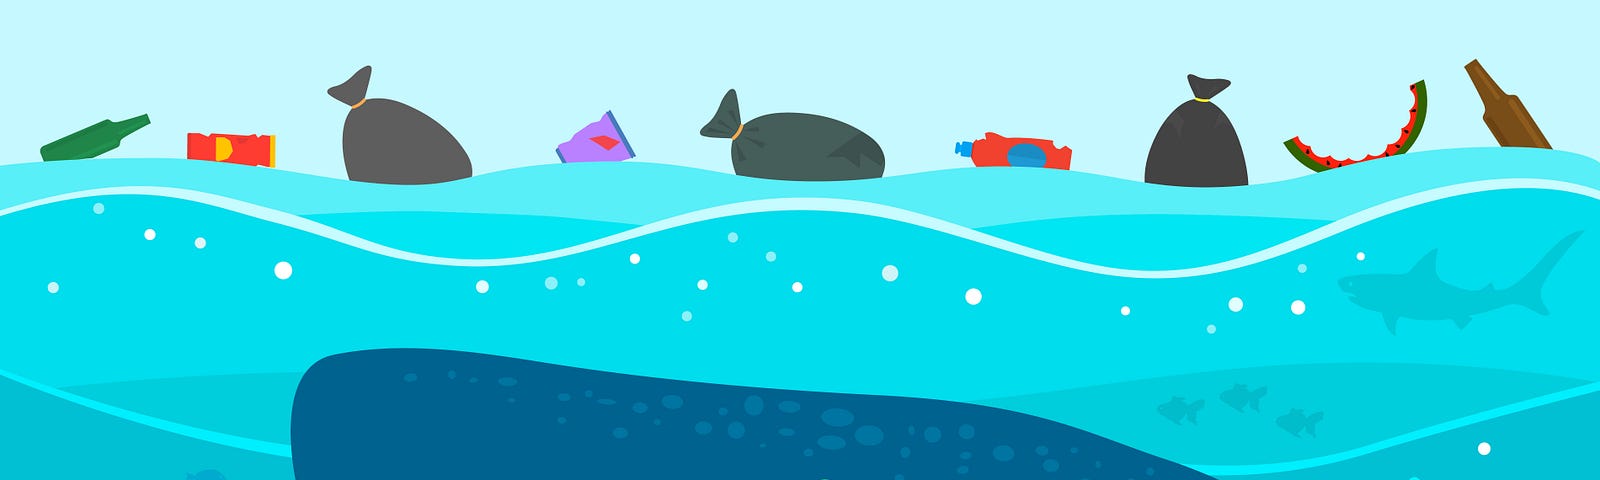 Illustration of a whale that has eating plastic trash against a polluted sea.